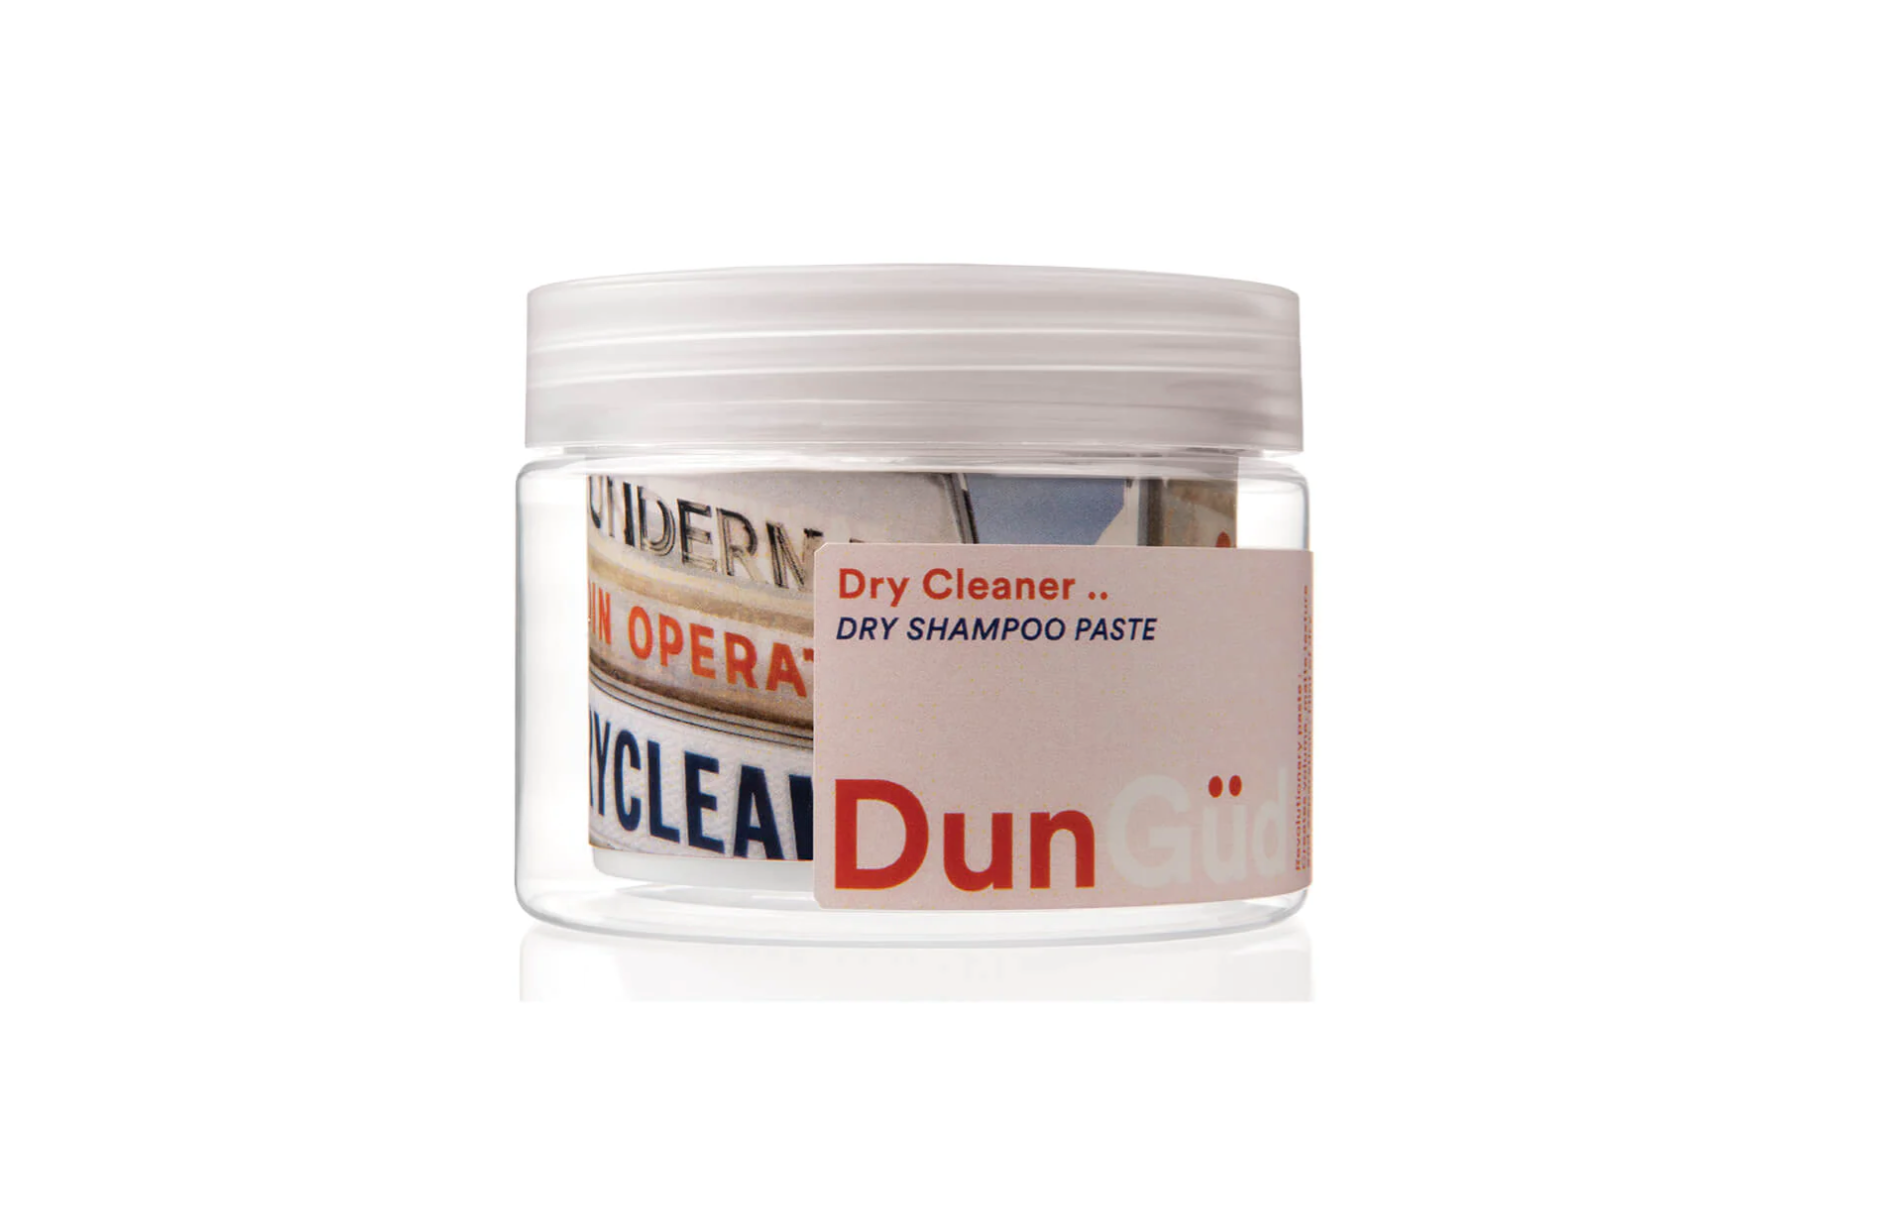 DunGud Dry Cleaner Dry Shampoo Paste 100ml